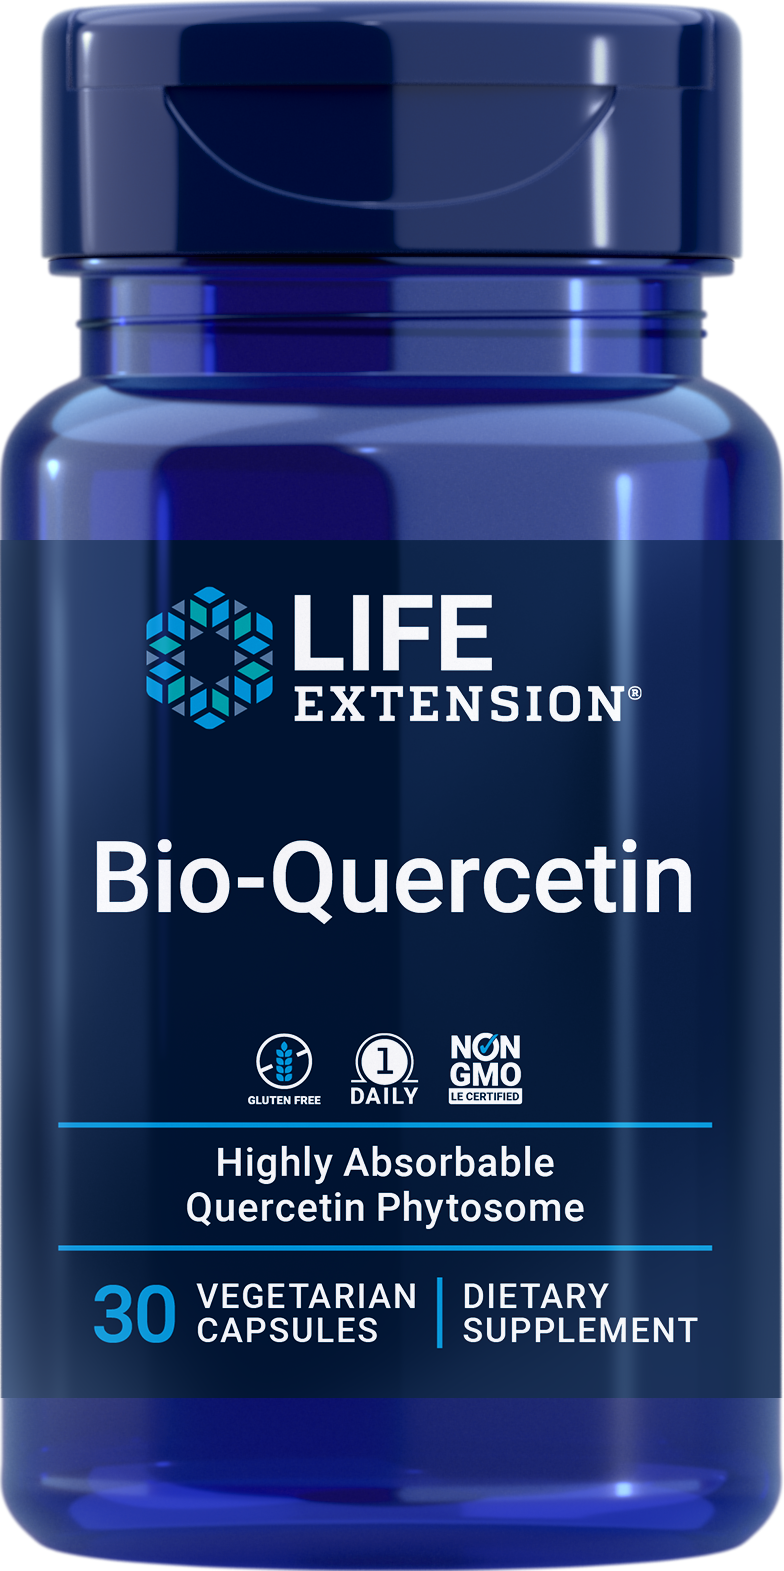 Life Extension’s ultra-absorbable Bio-Quercetin supplement is up to 62 times more absorbable than standard quercetin.